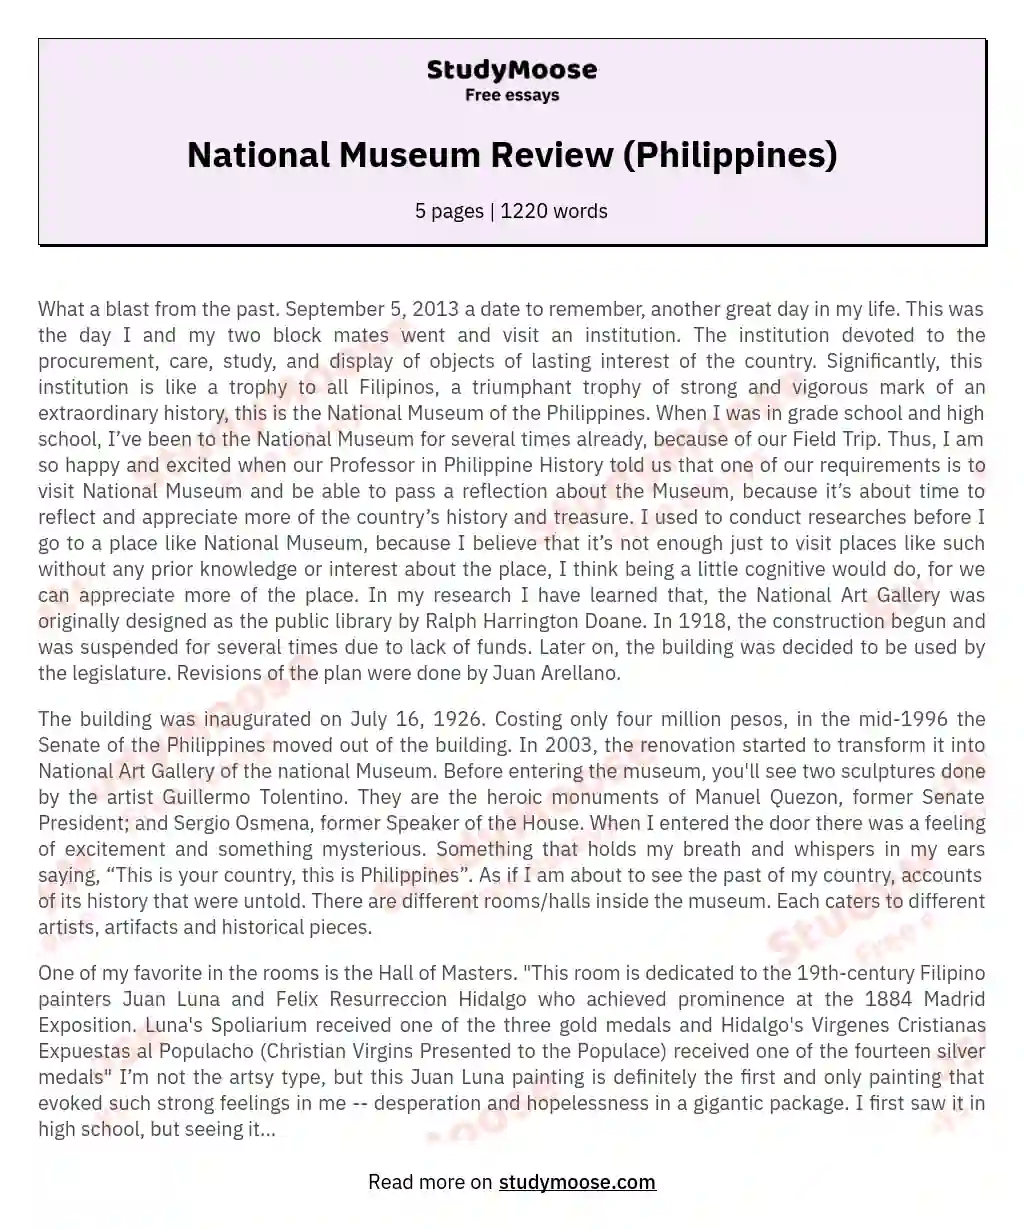 National Museum Review (Philippines)